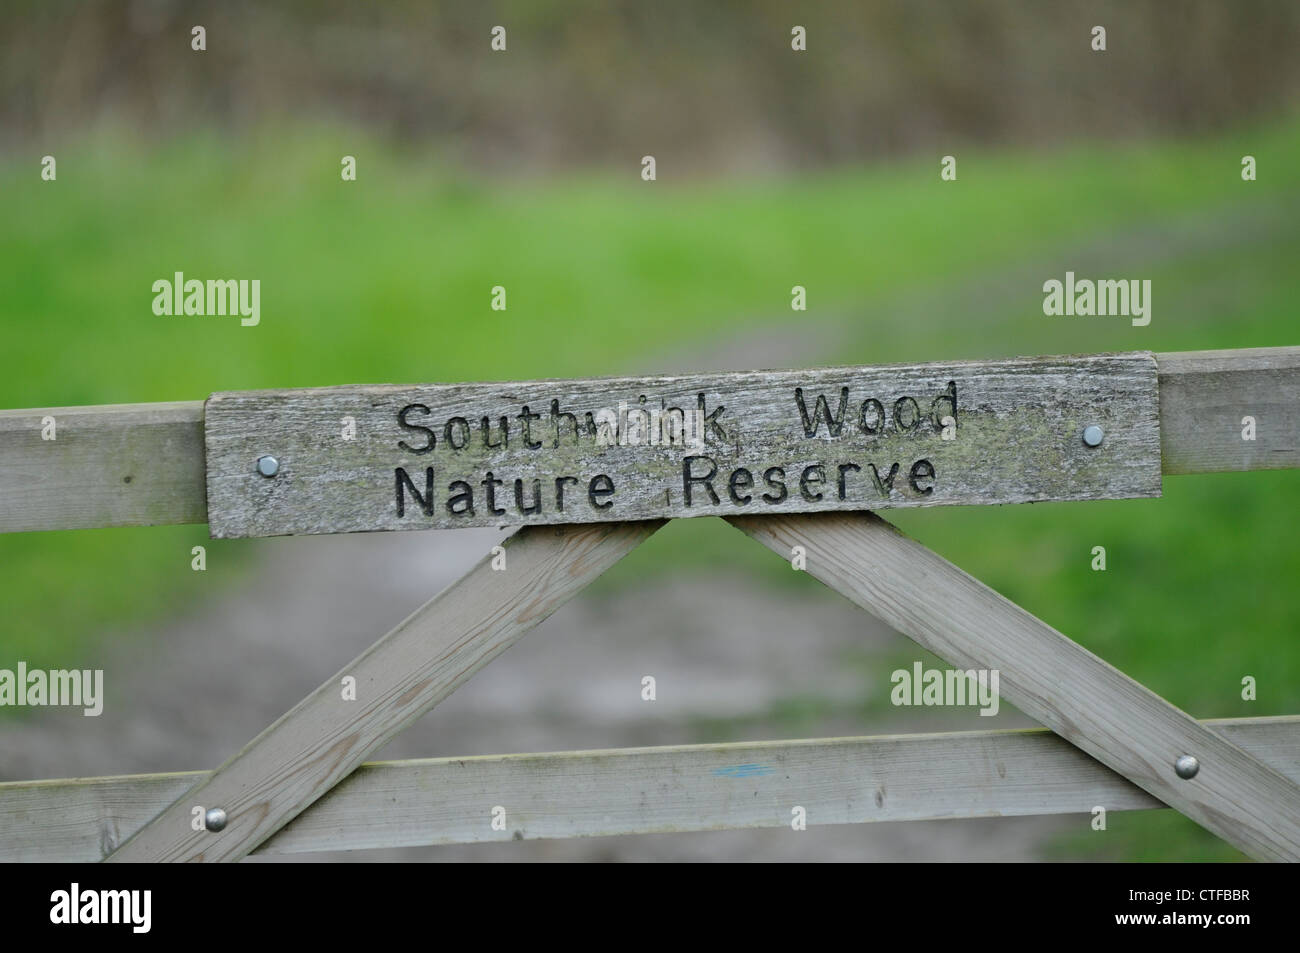 Sign on country gate for Southwick Wood Nature Reserve Stock Photo